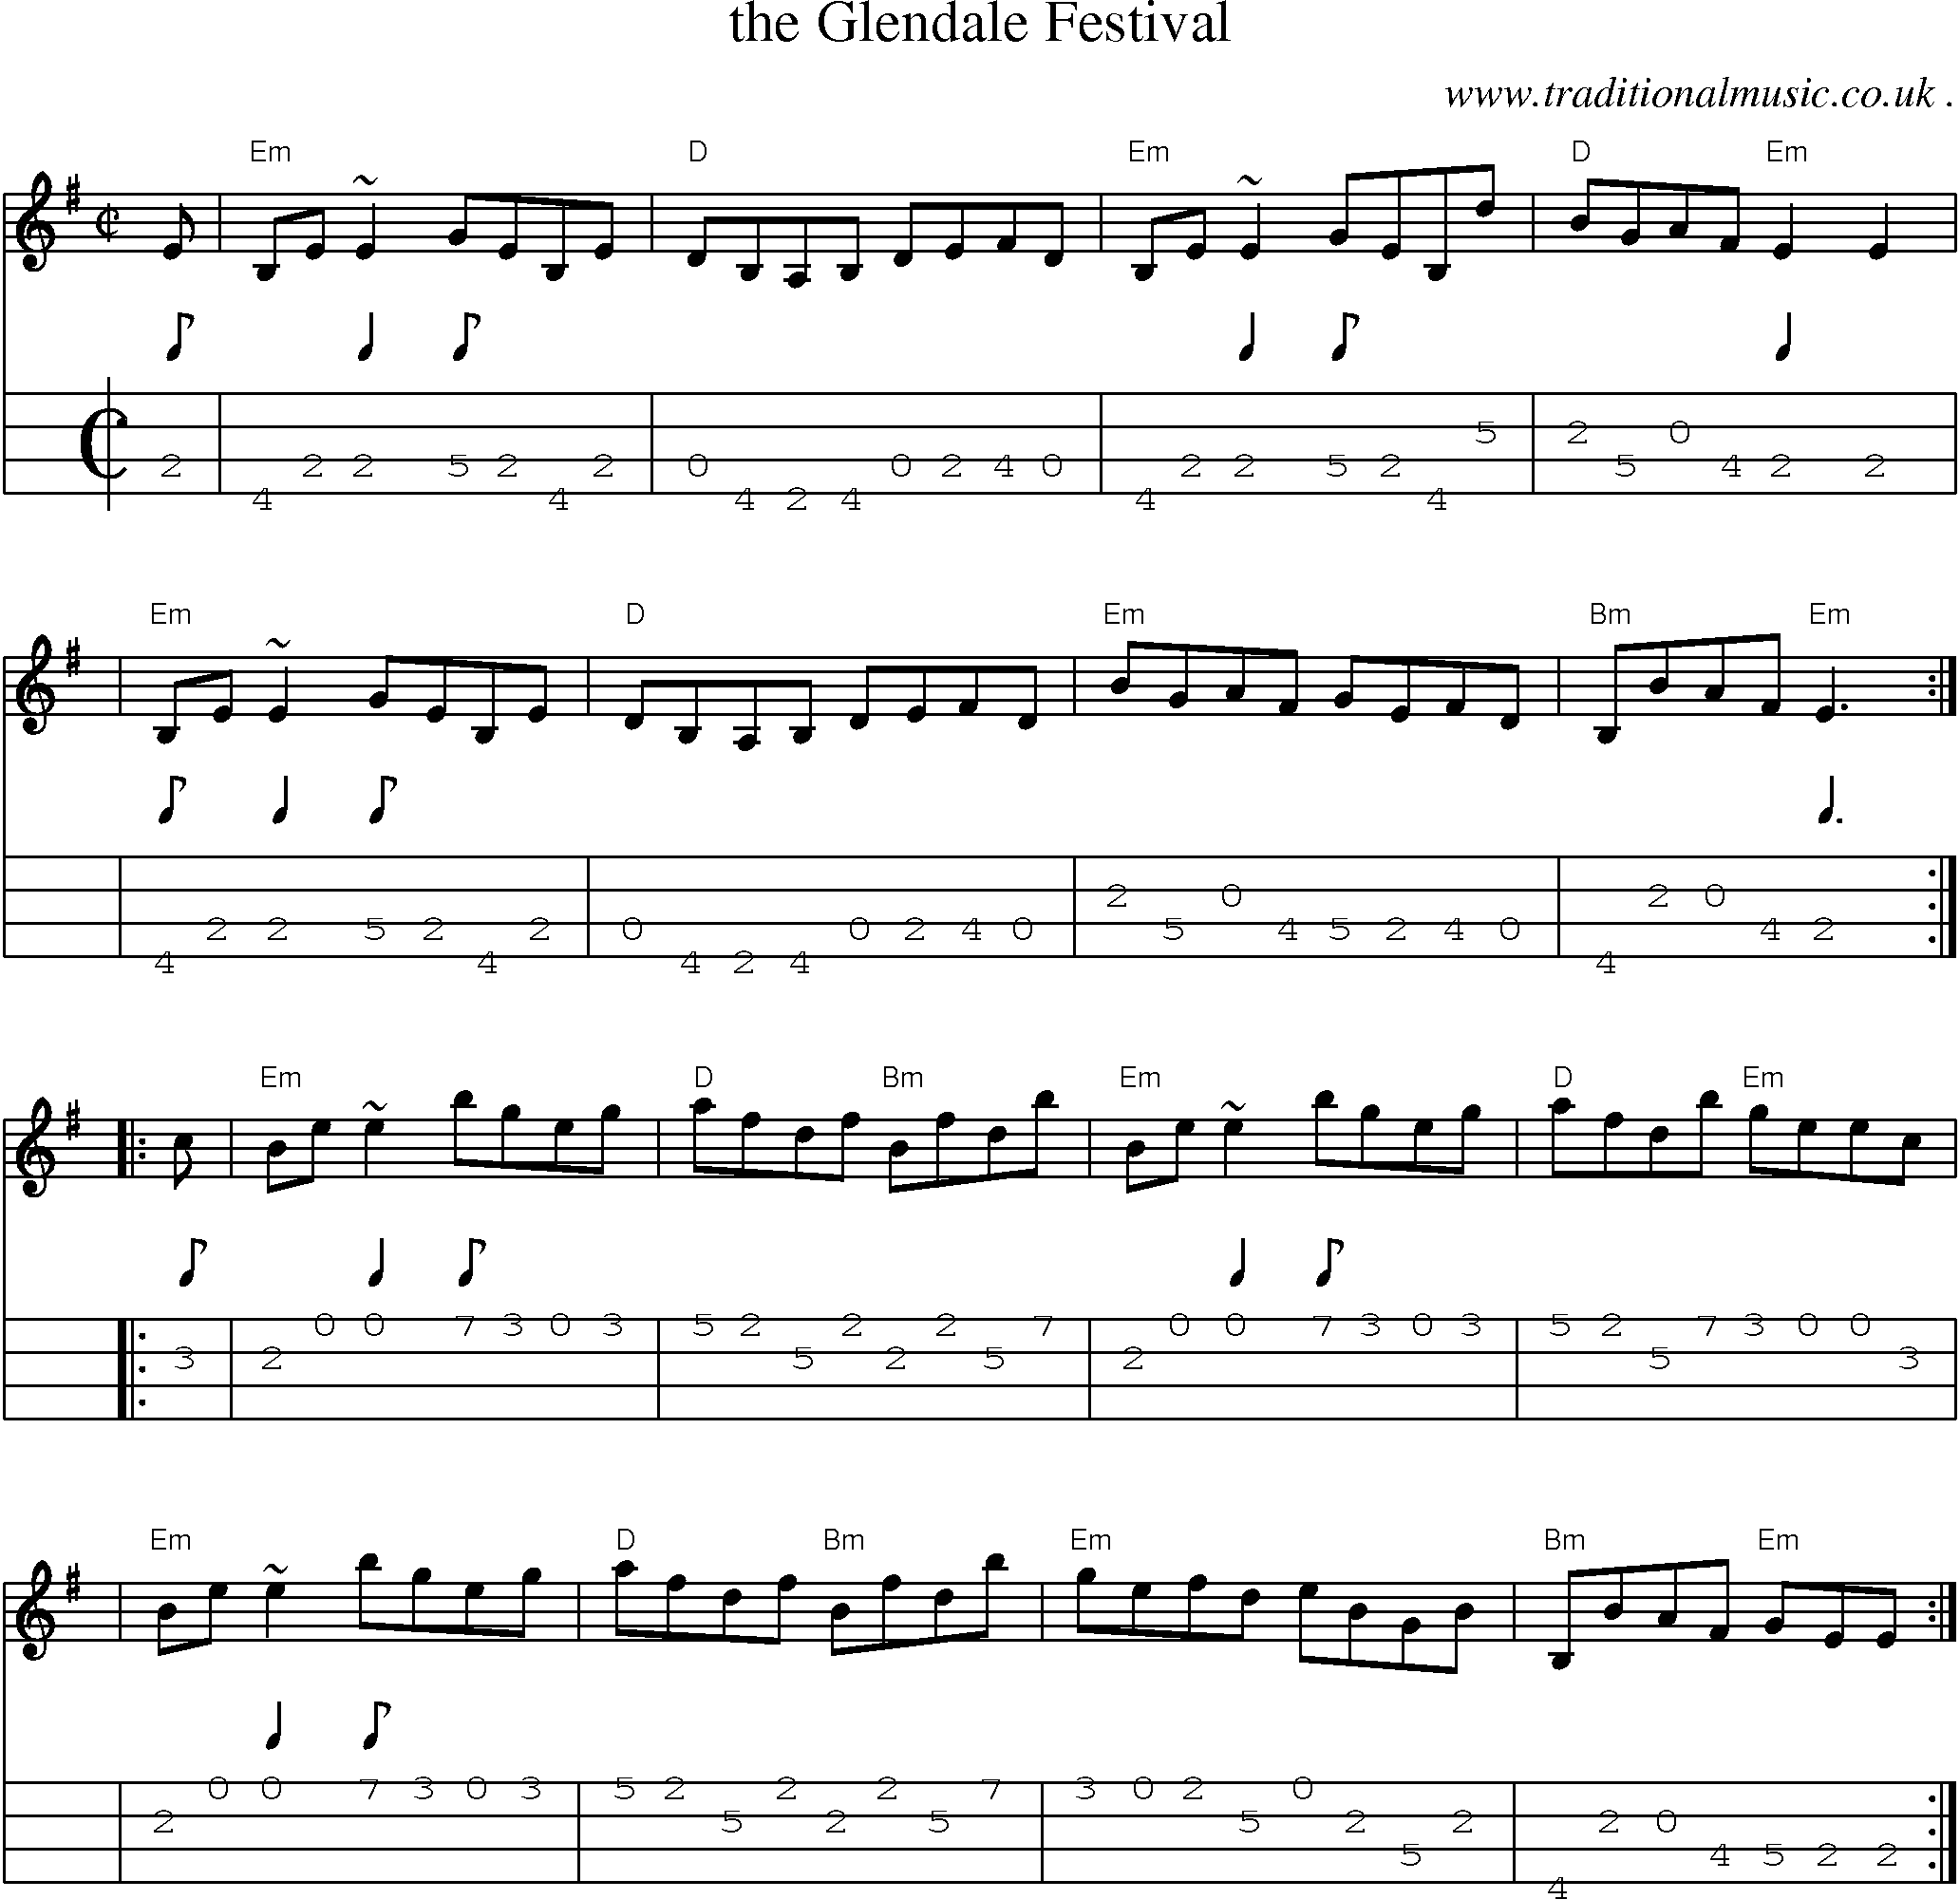 Sheet-music  score, Chords and Mandolin Tabs for The Glendale Festival